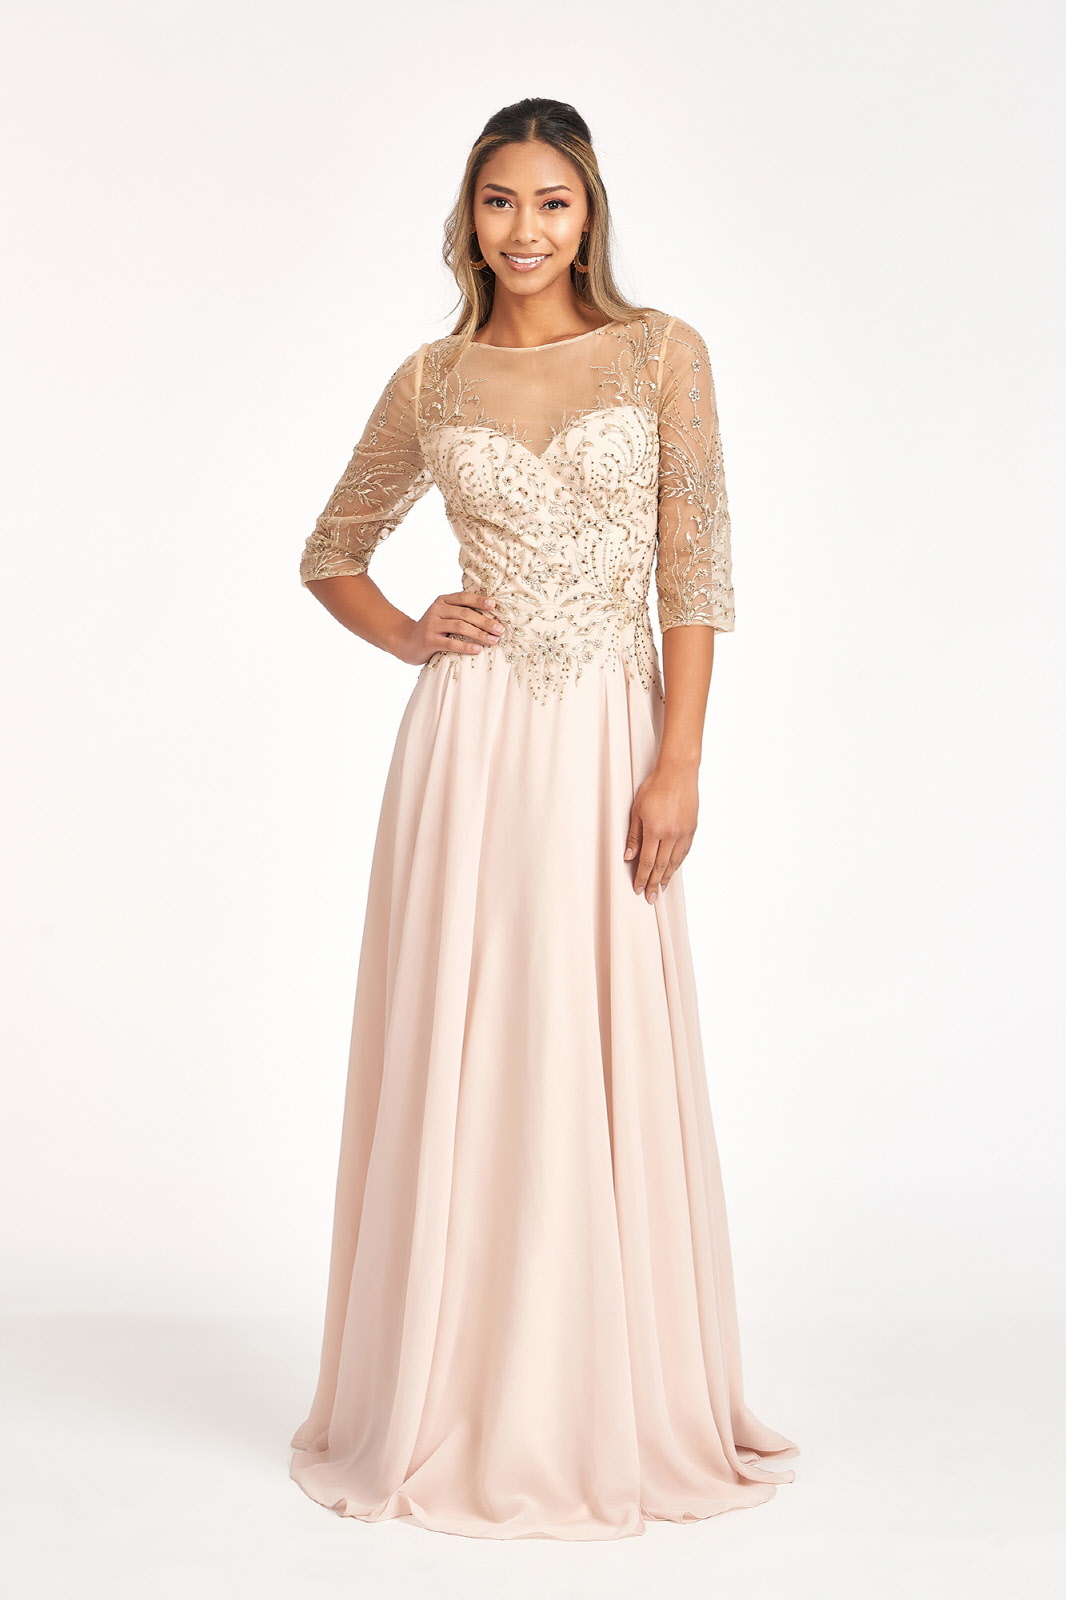 Beads Embellished Embroidered Chiffon A-line Dress w/ 3/4 Sleeves